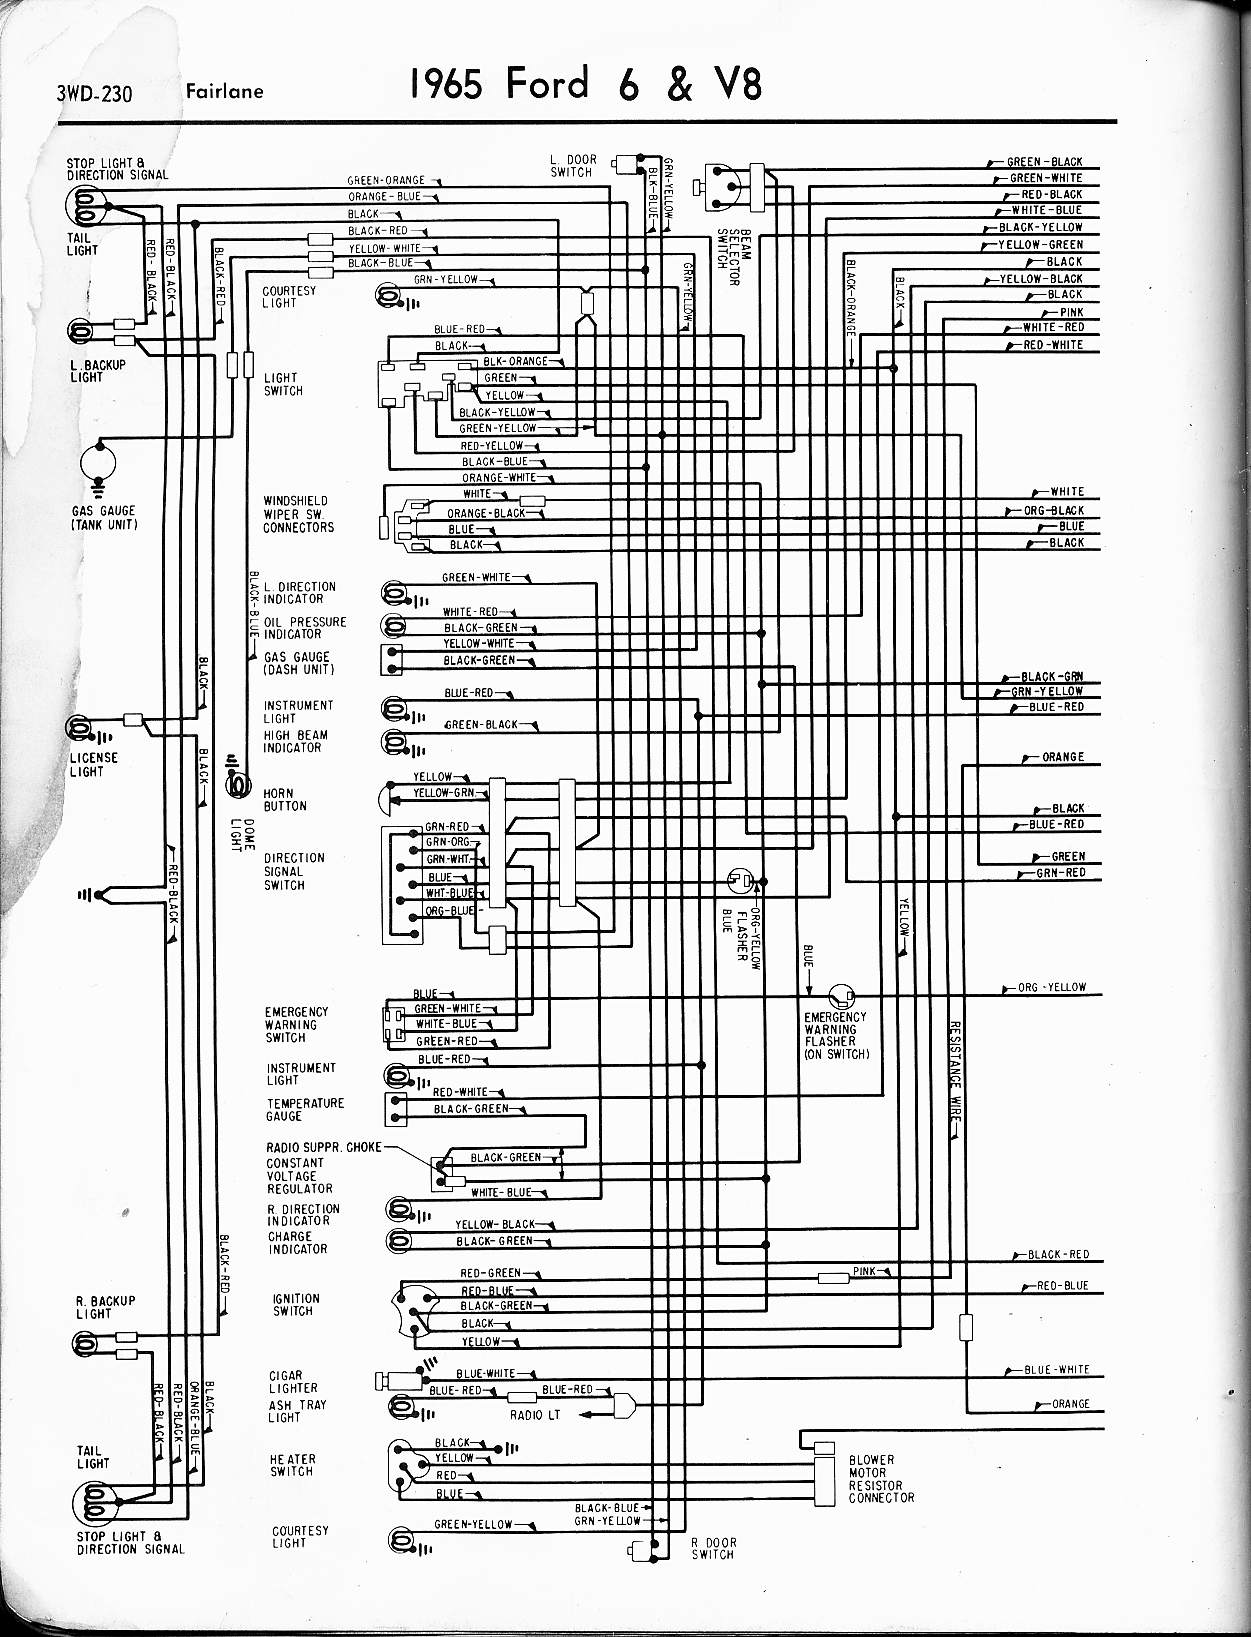 2000 Focus Turn Signal Wiring Diagram from www.oldcarmanualproject.com